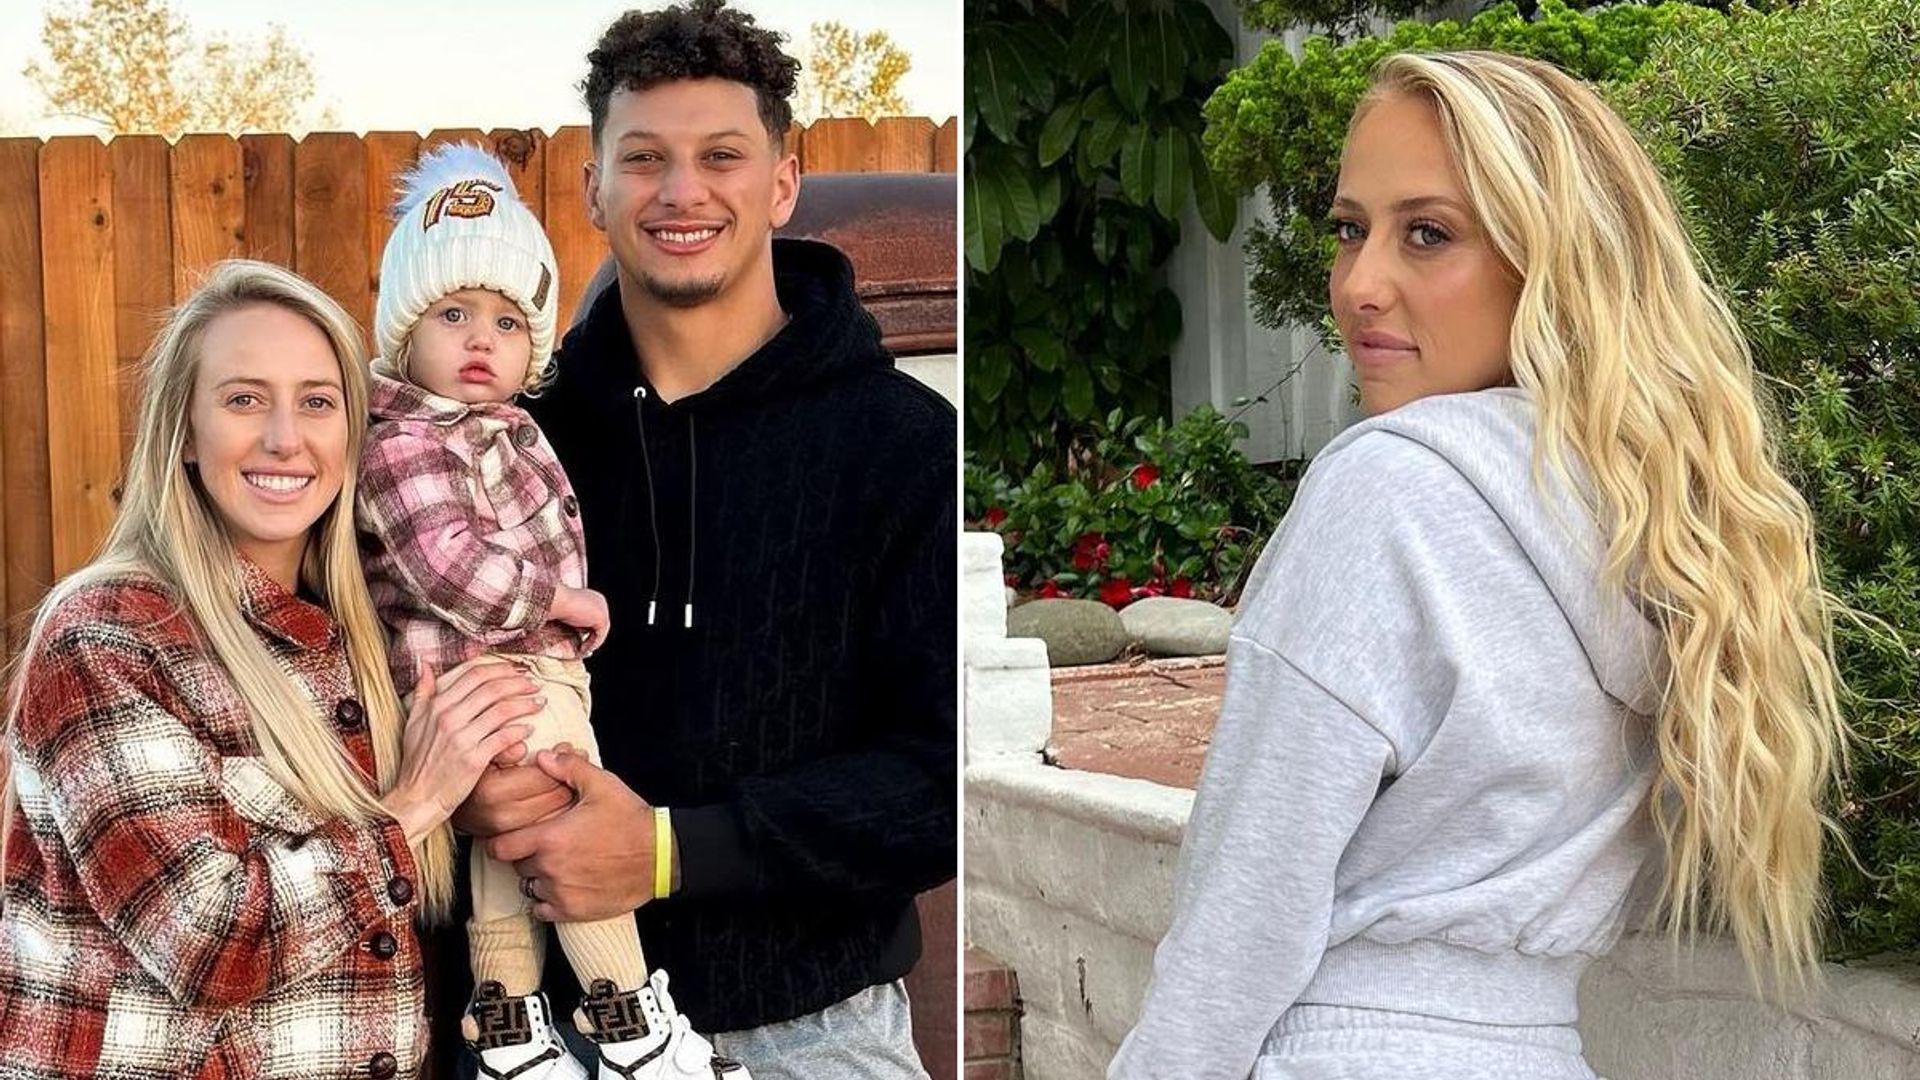 Nfl Star Patrick Mahomes Wife Brittany Poses In Nude Dress For Special Shoot Hello